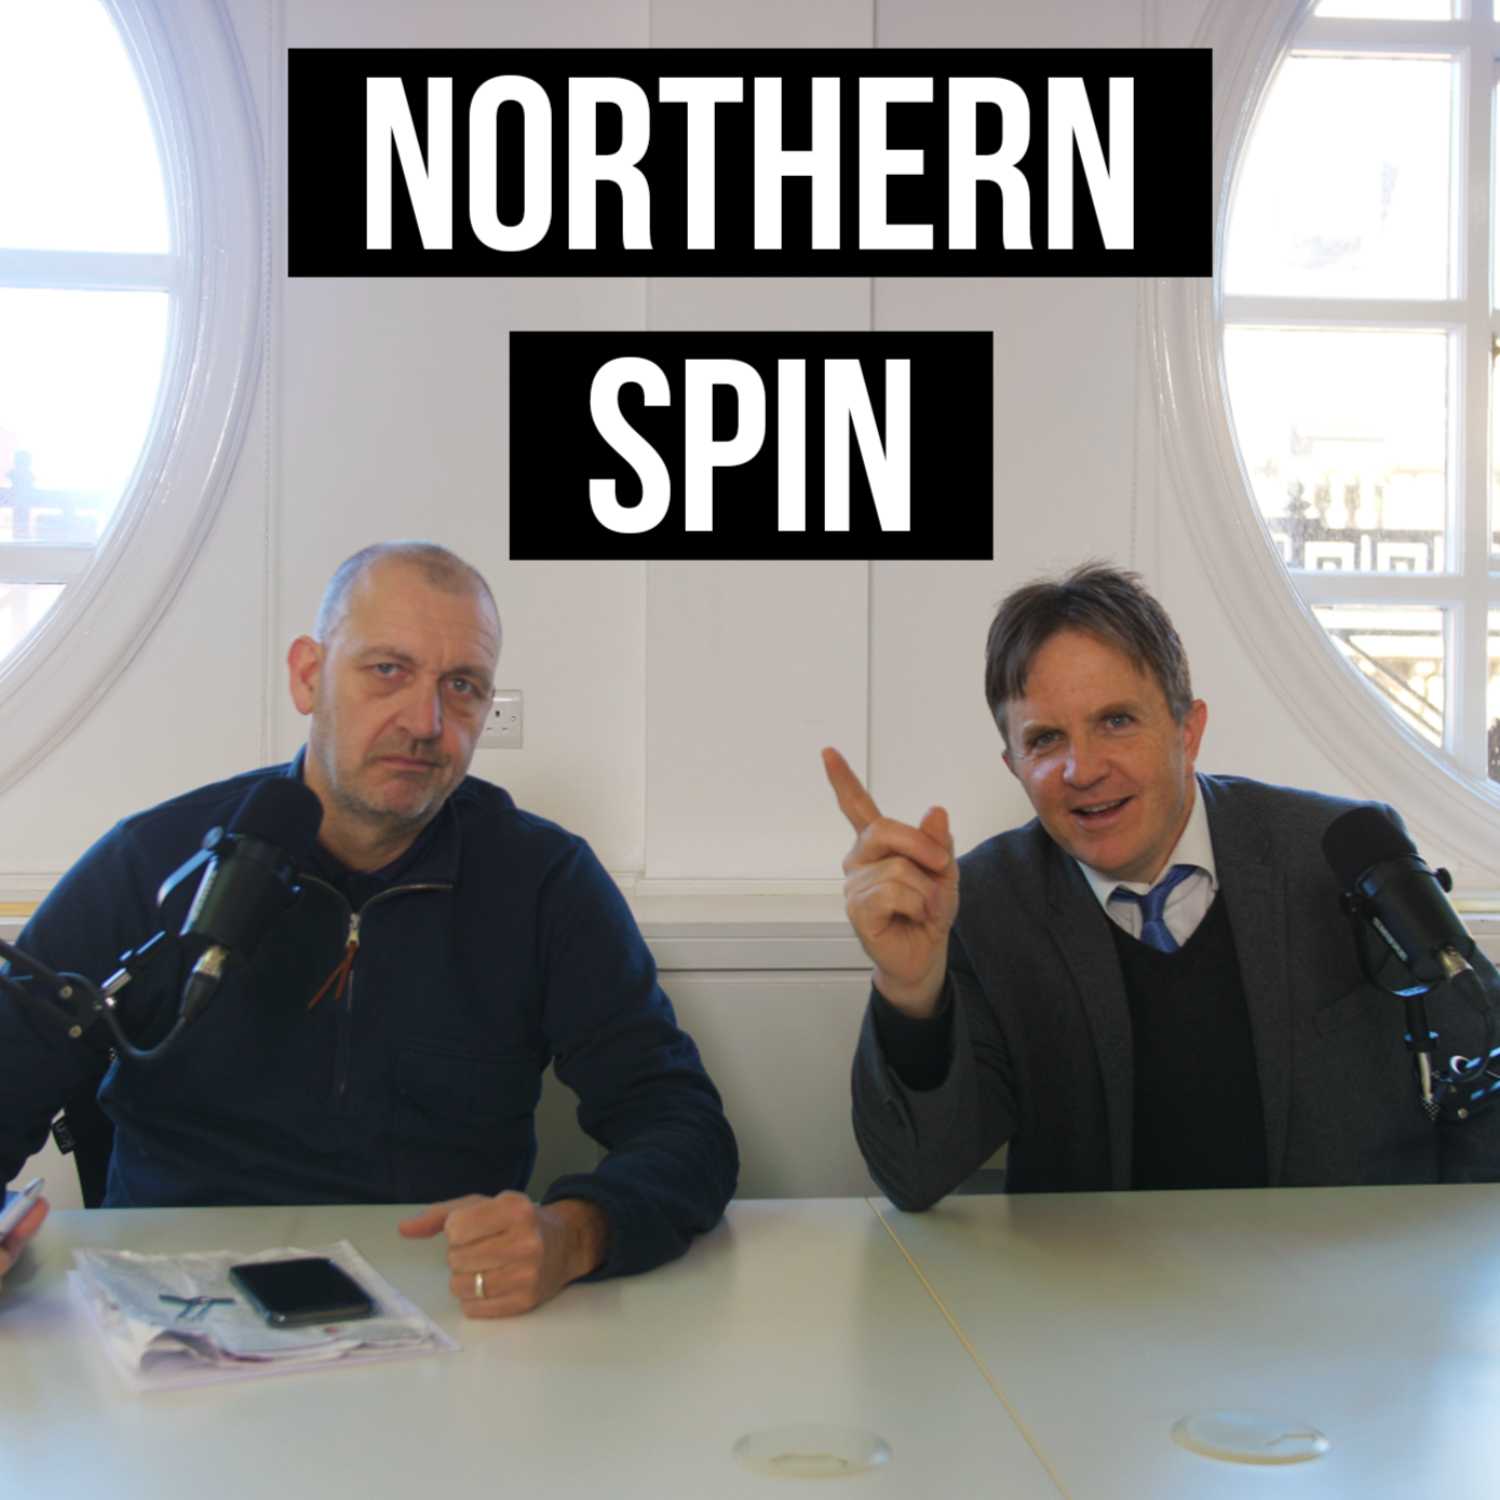 Northern Spin - Season 4 - Episode 6: After The Clown Show, It’s Time To Get Serious